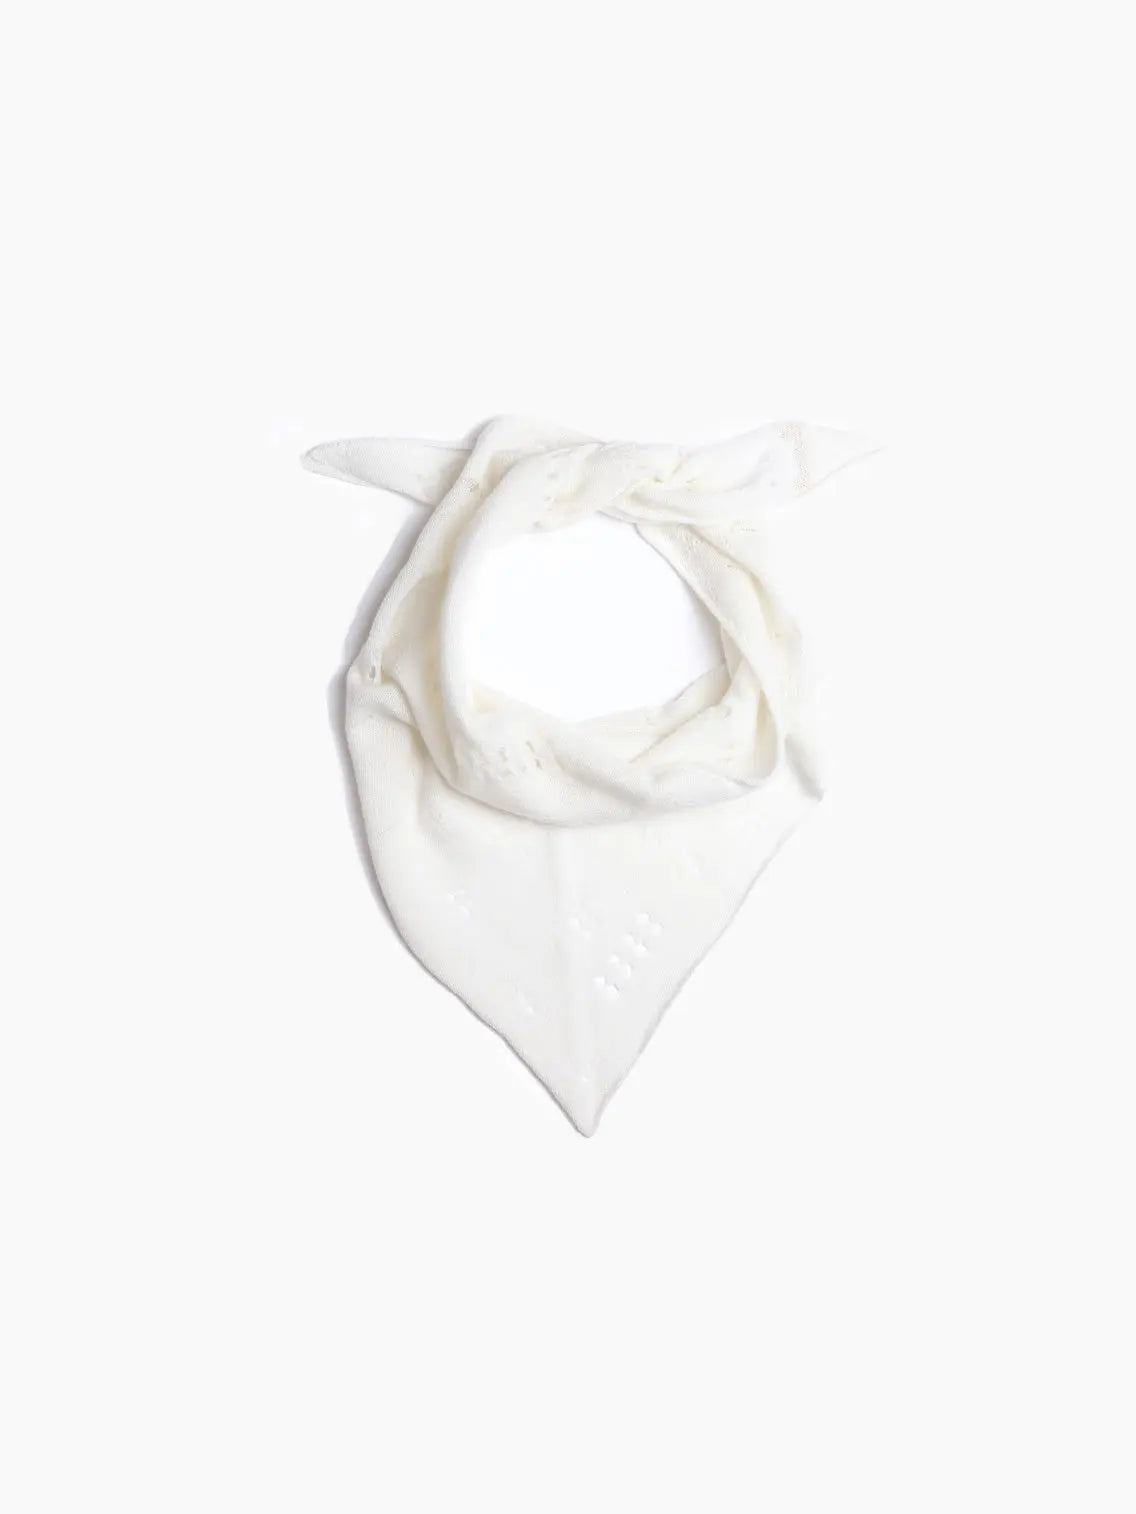 A white Tar Mini Scarf Ecru folded into a triangle lies on a white background. The scarf, available at Bassalstore Barcelona, has a simple, clean design and appears to be made of cotton or a similar fabric.